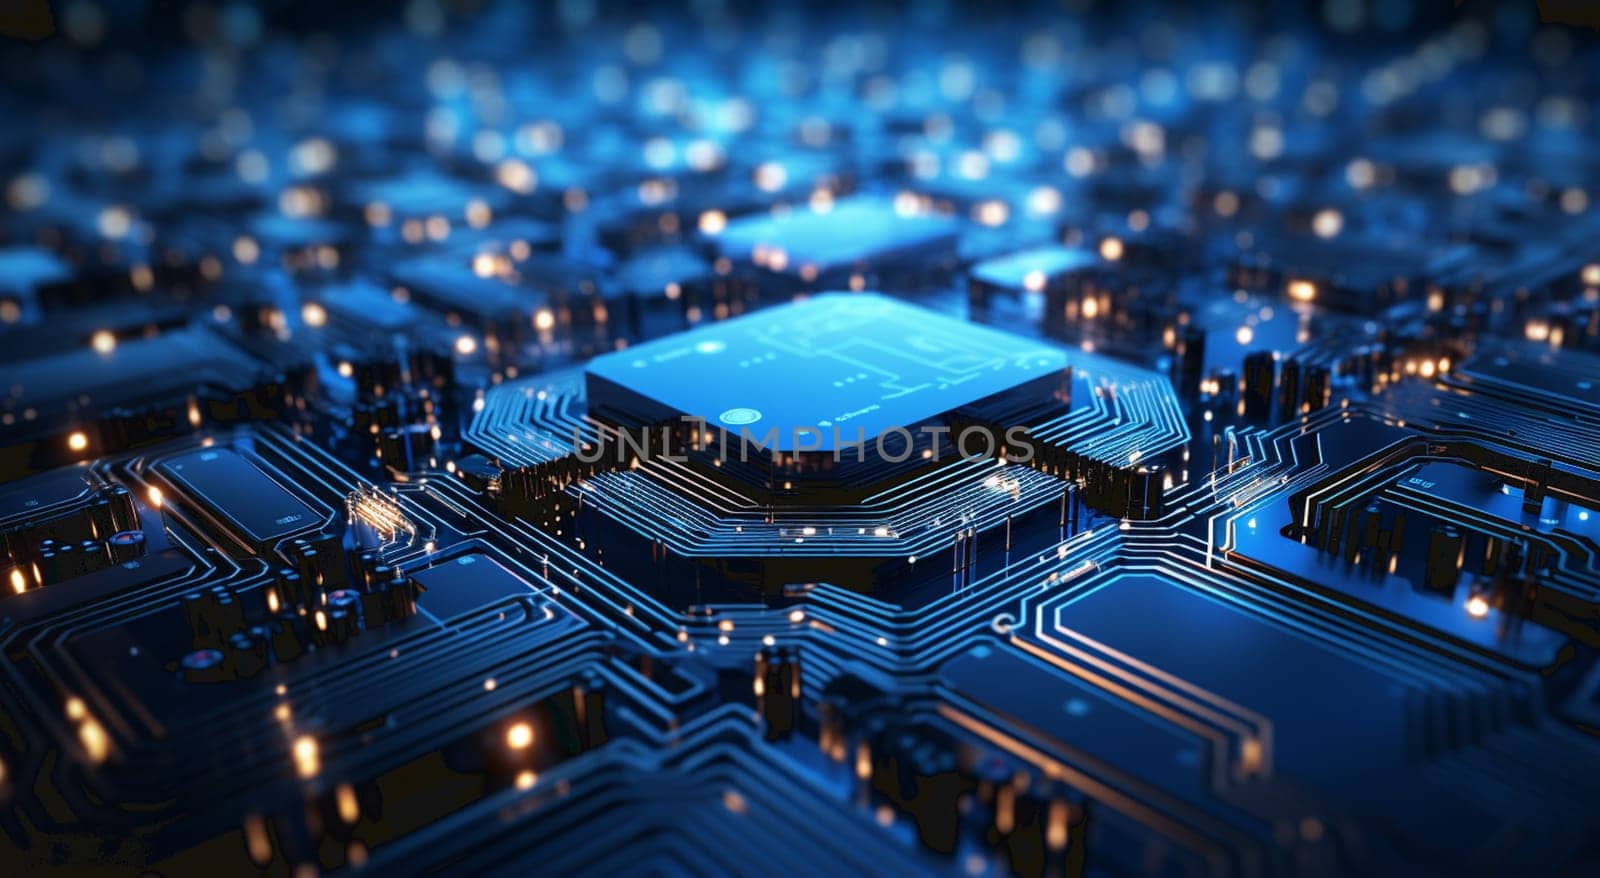 View of a Server abstract background illustration - 3d rendering